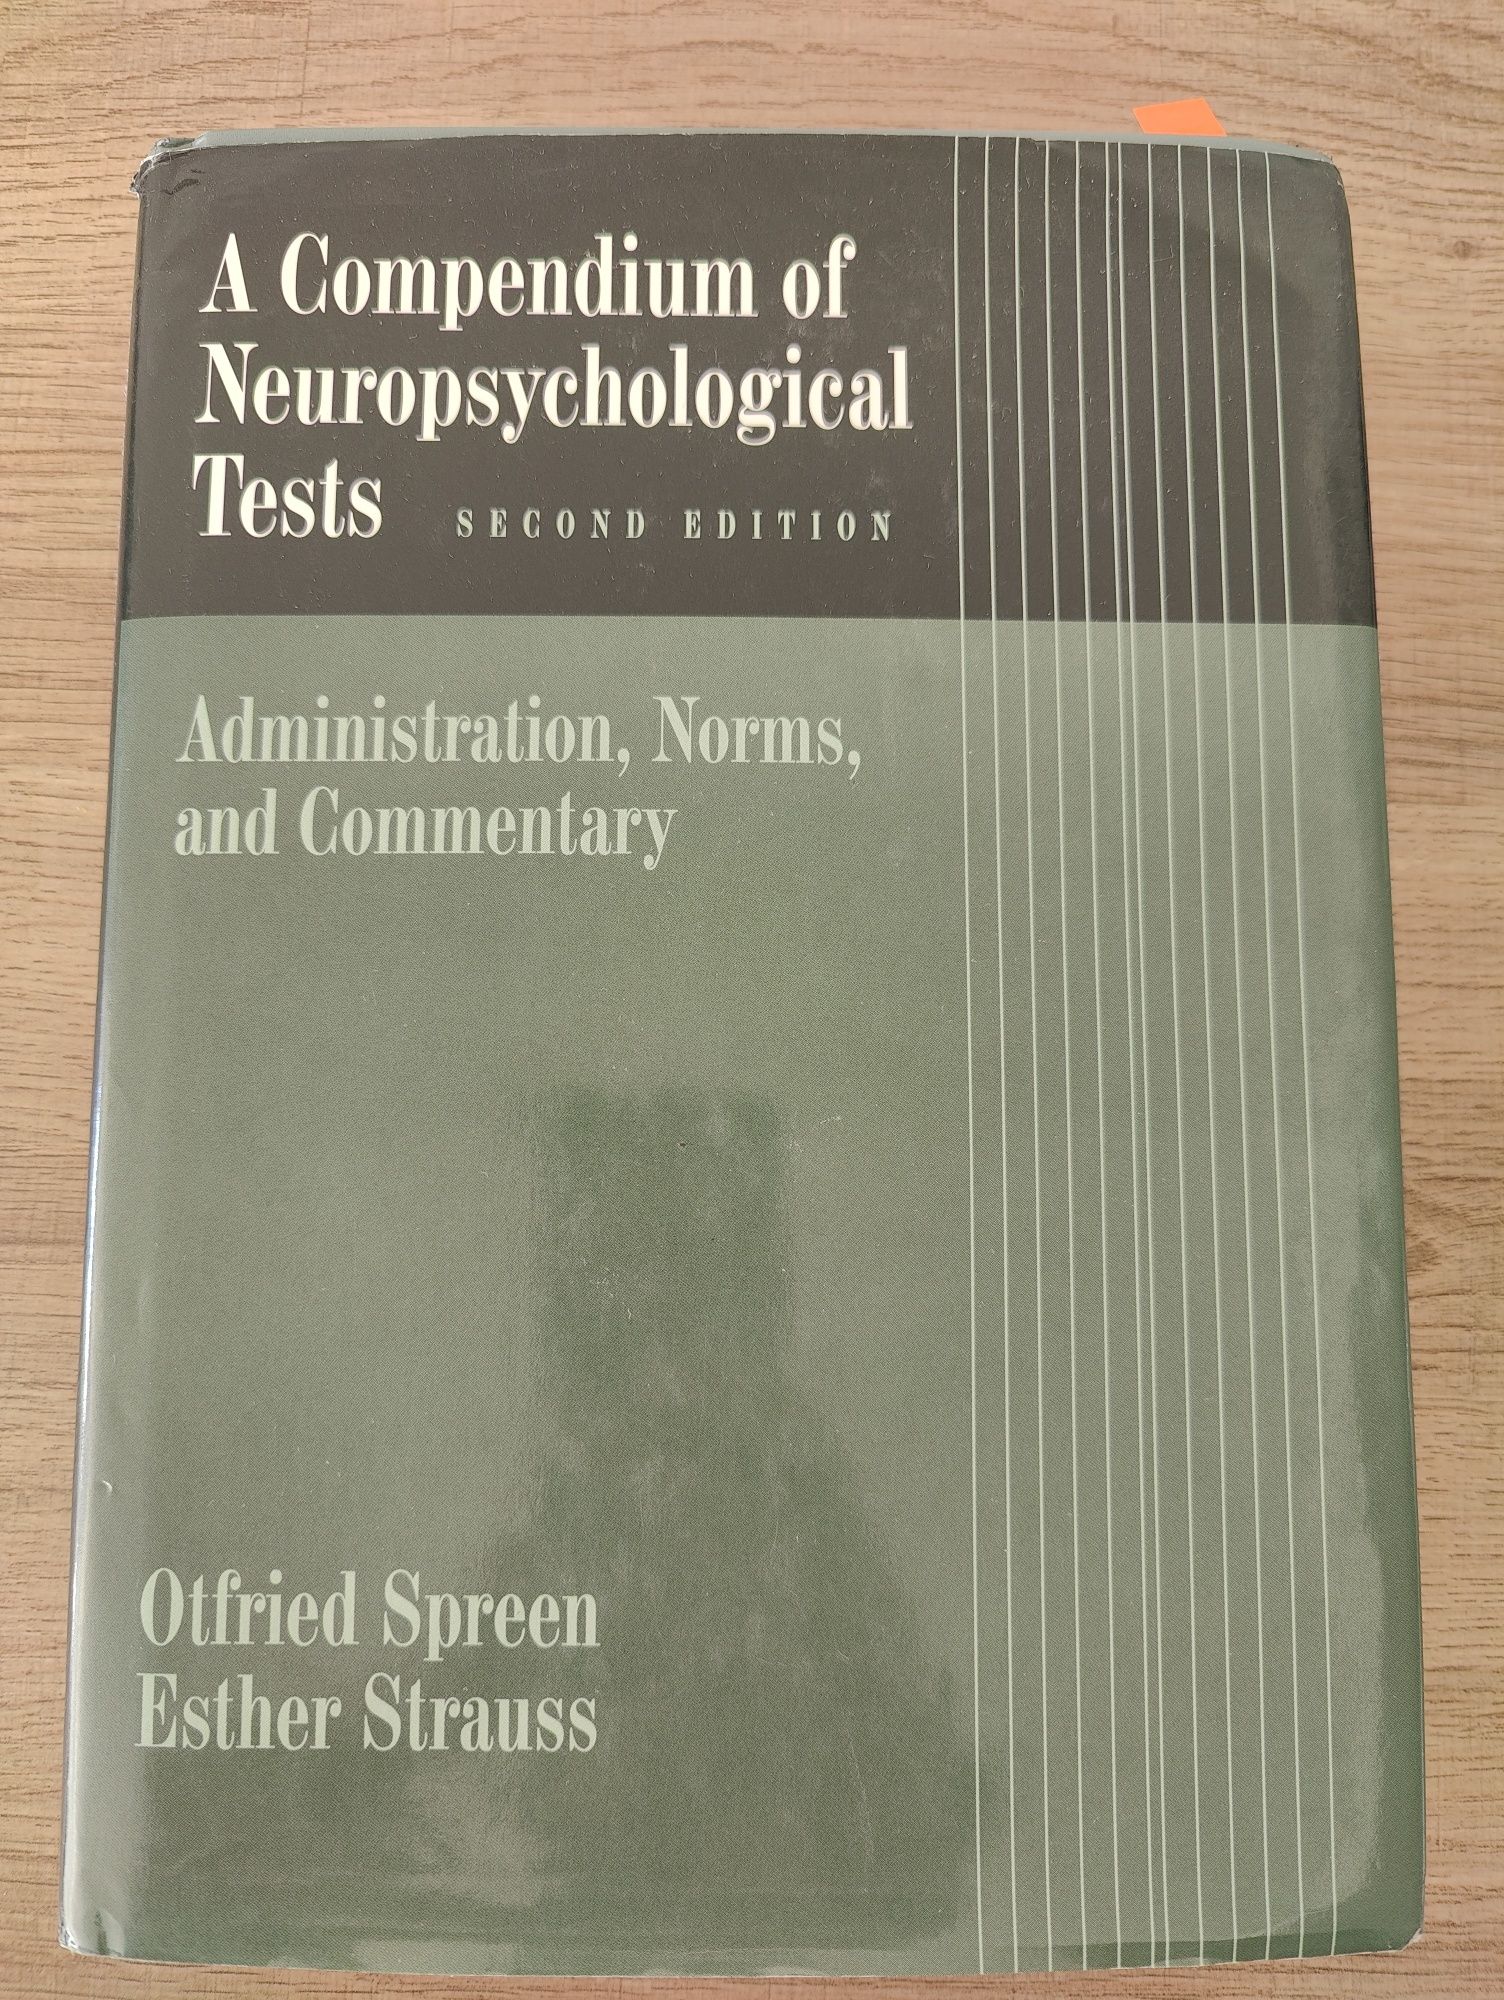 A Compendium of Neuropsychological Tests